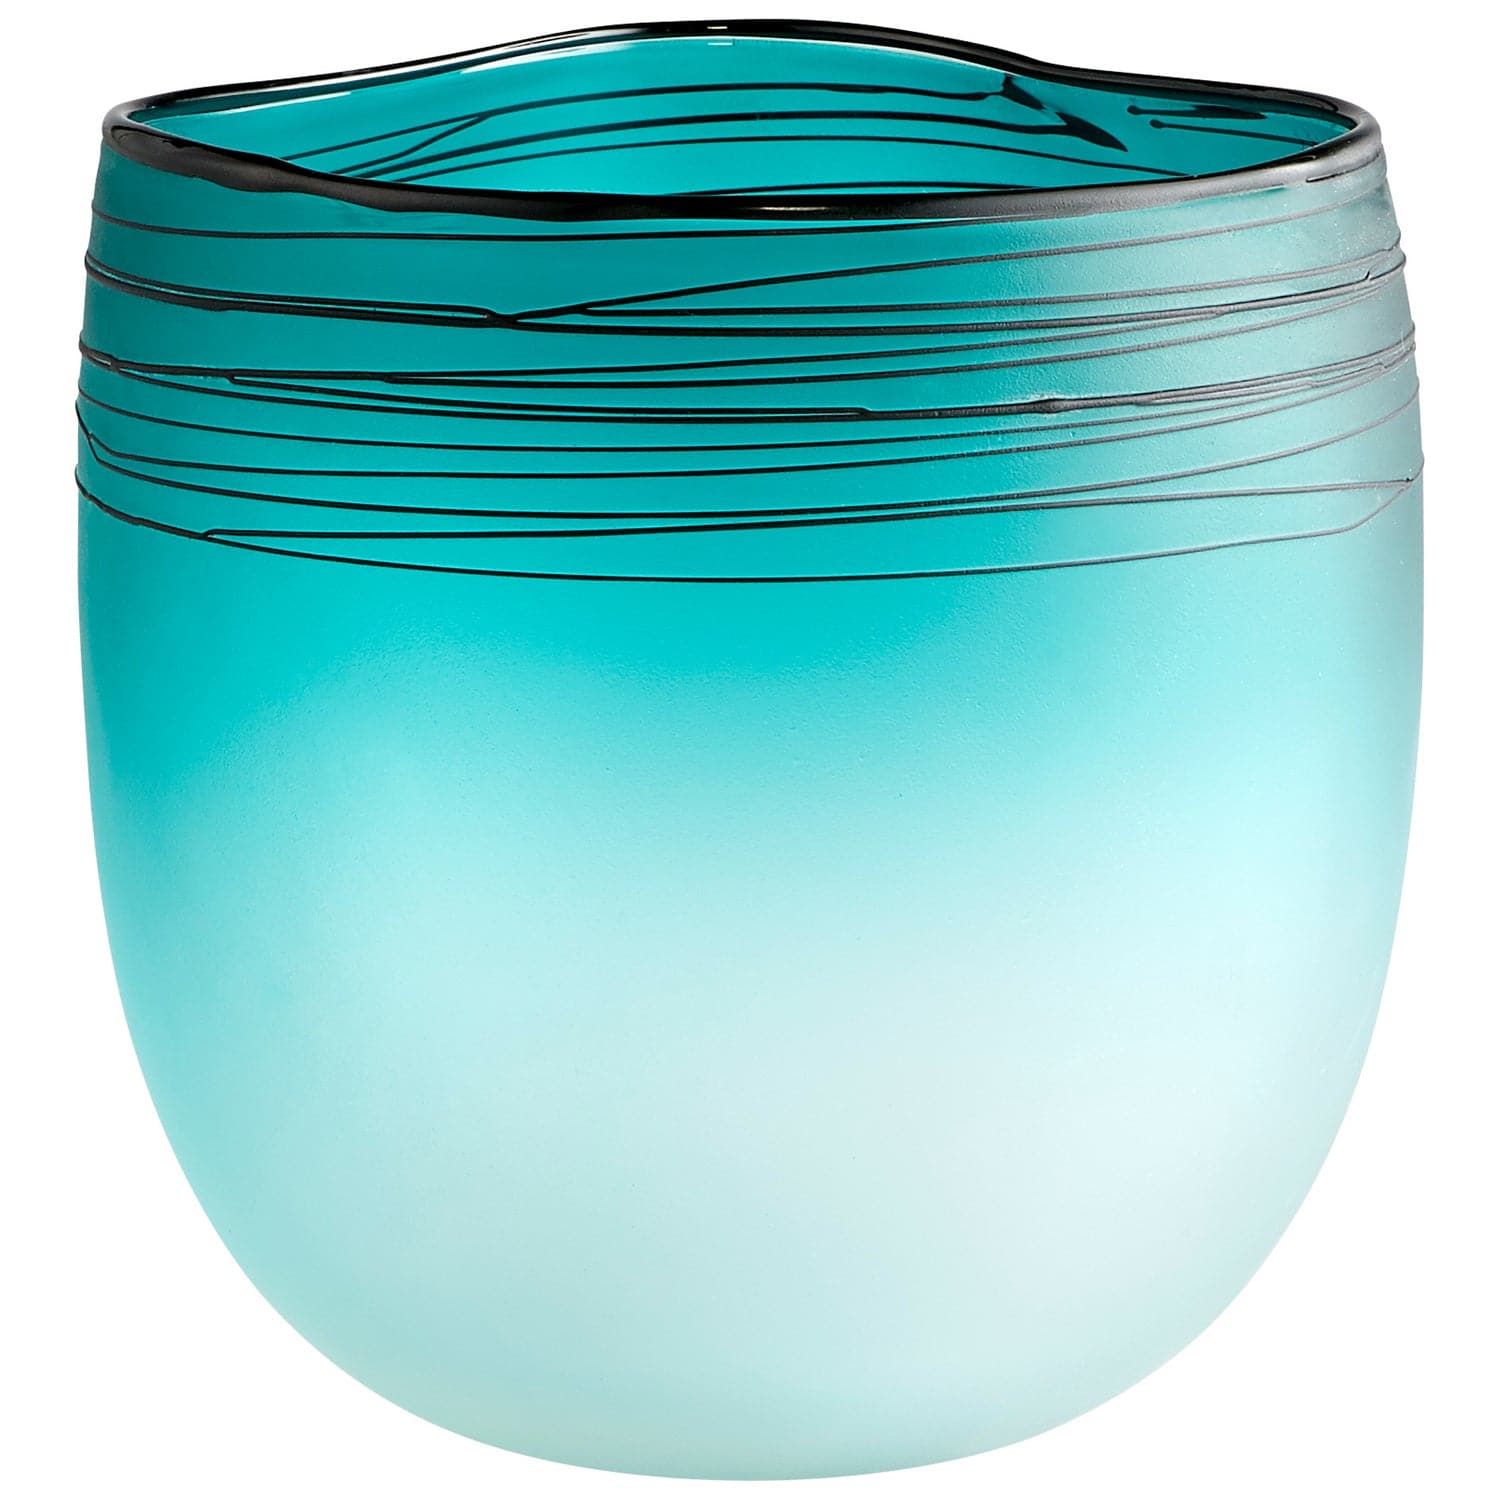 Cyan - 10895 - Vase - Blue And White